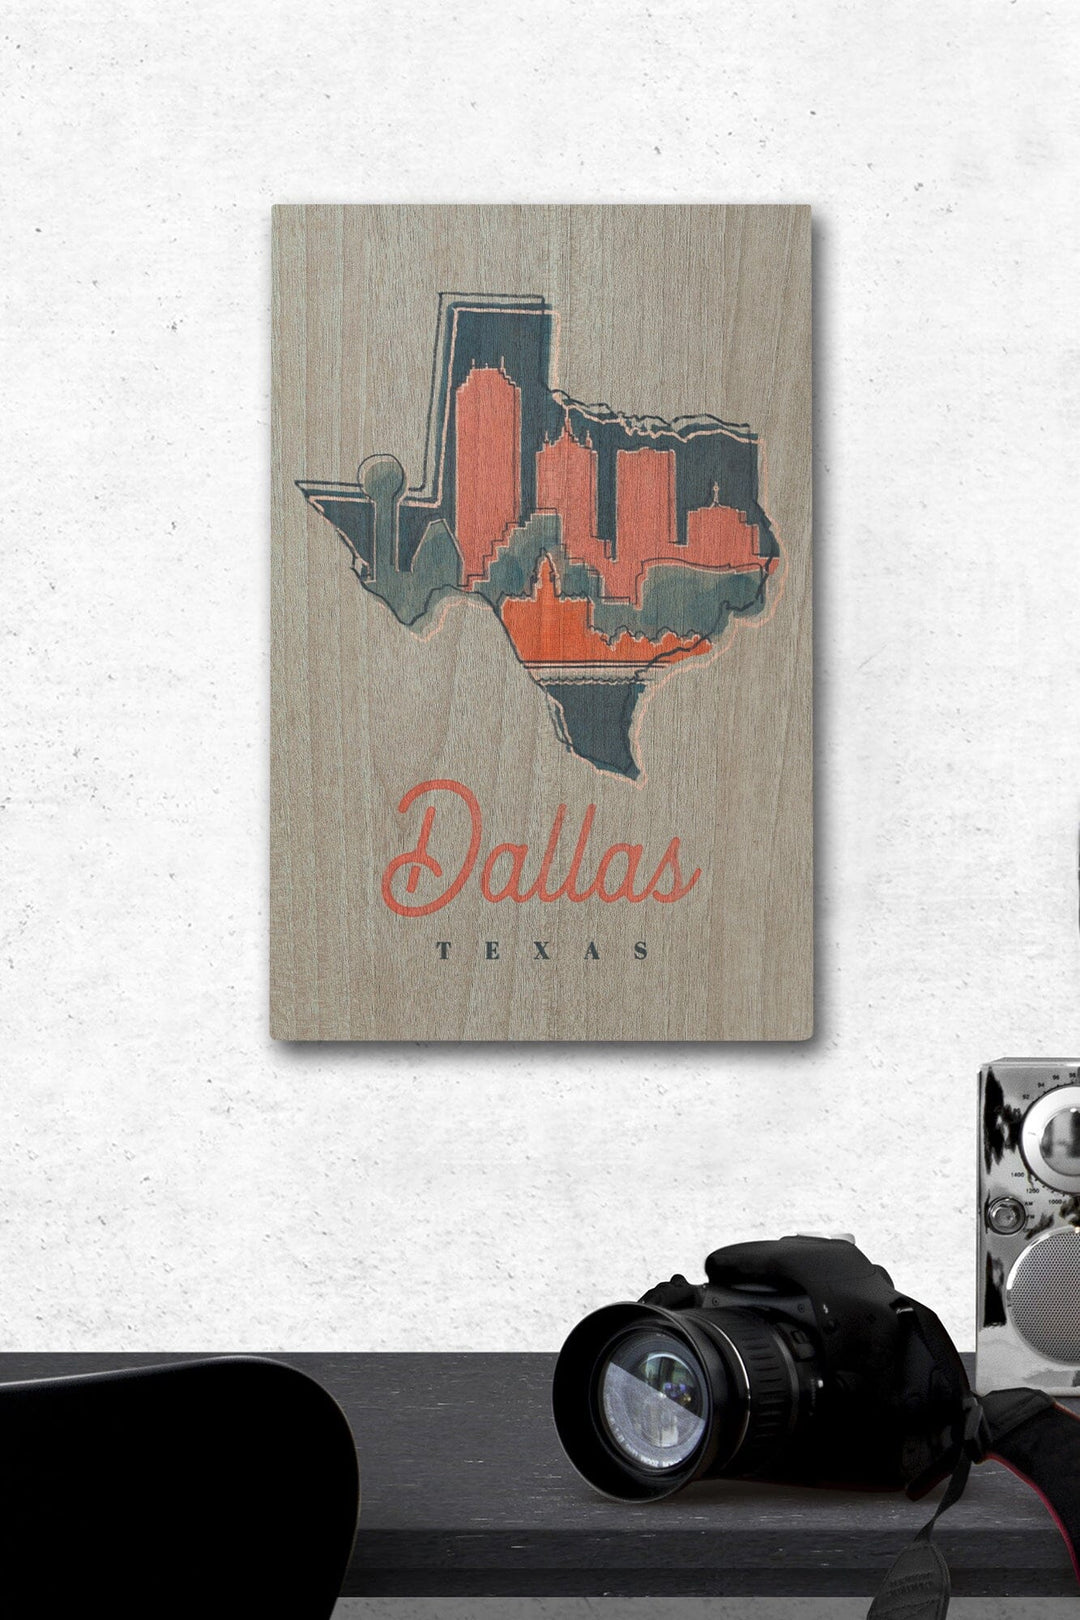 Dallas, Texas, Whimsy City Collection, State and Skyline, Wood Signs and Postcards Wood Lantern Press 12 x 18 Wood Gallery Print 